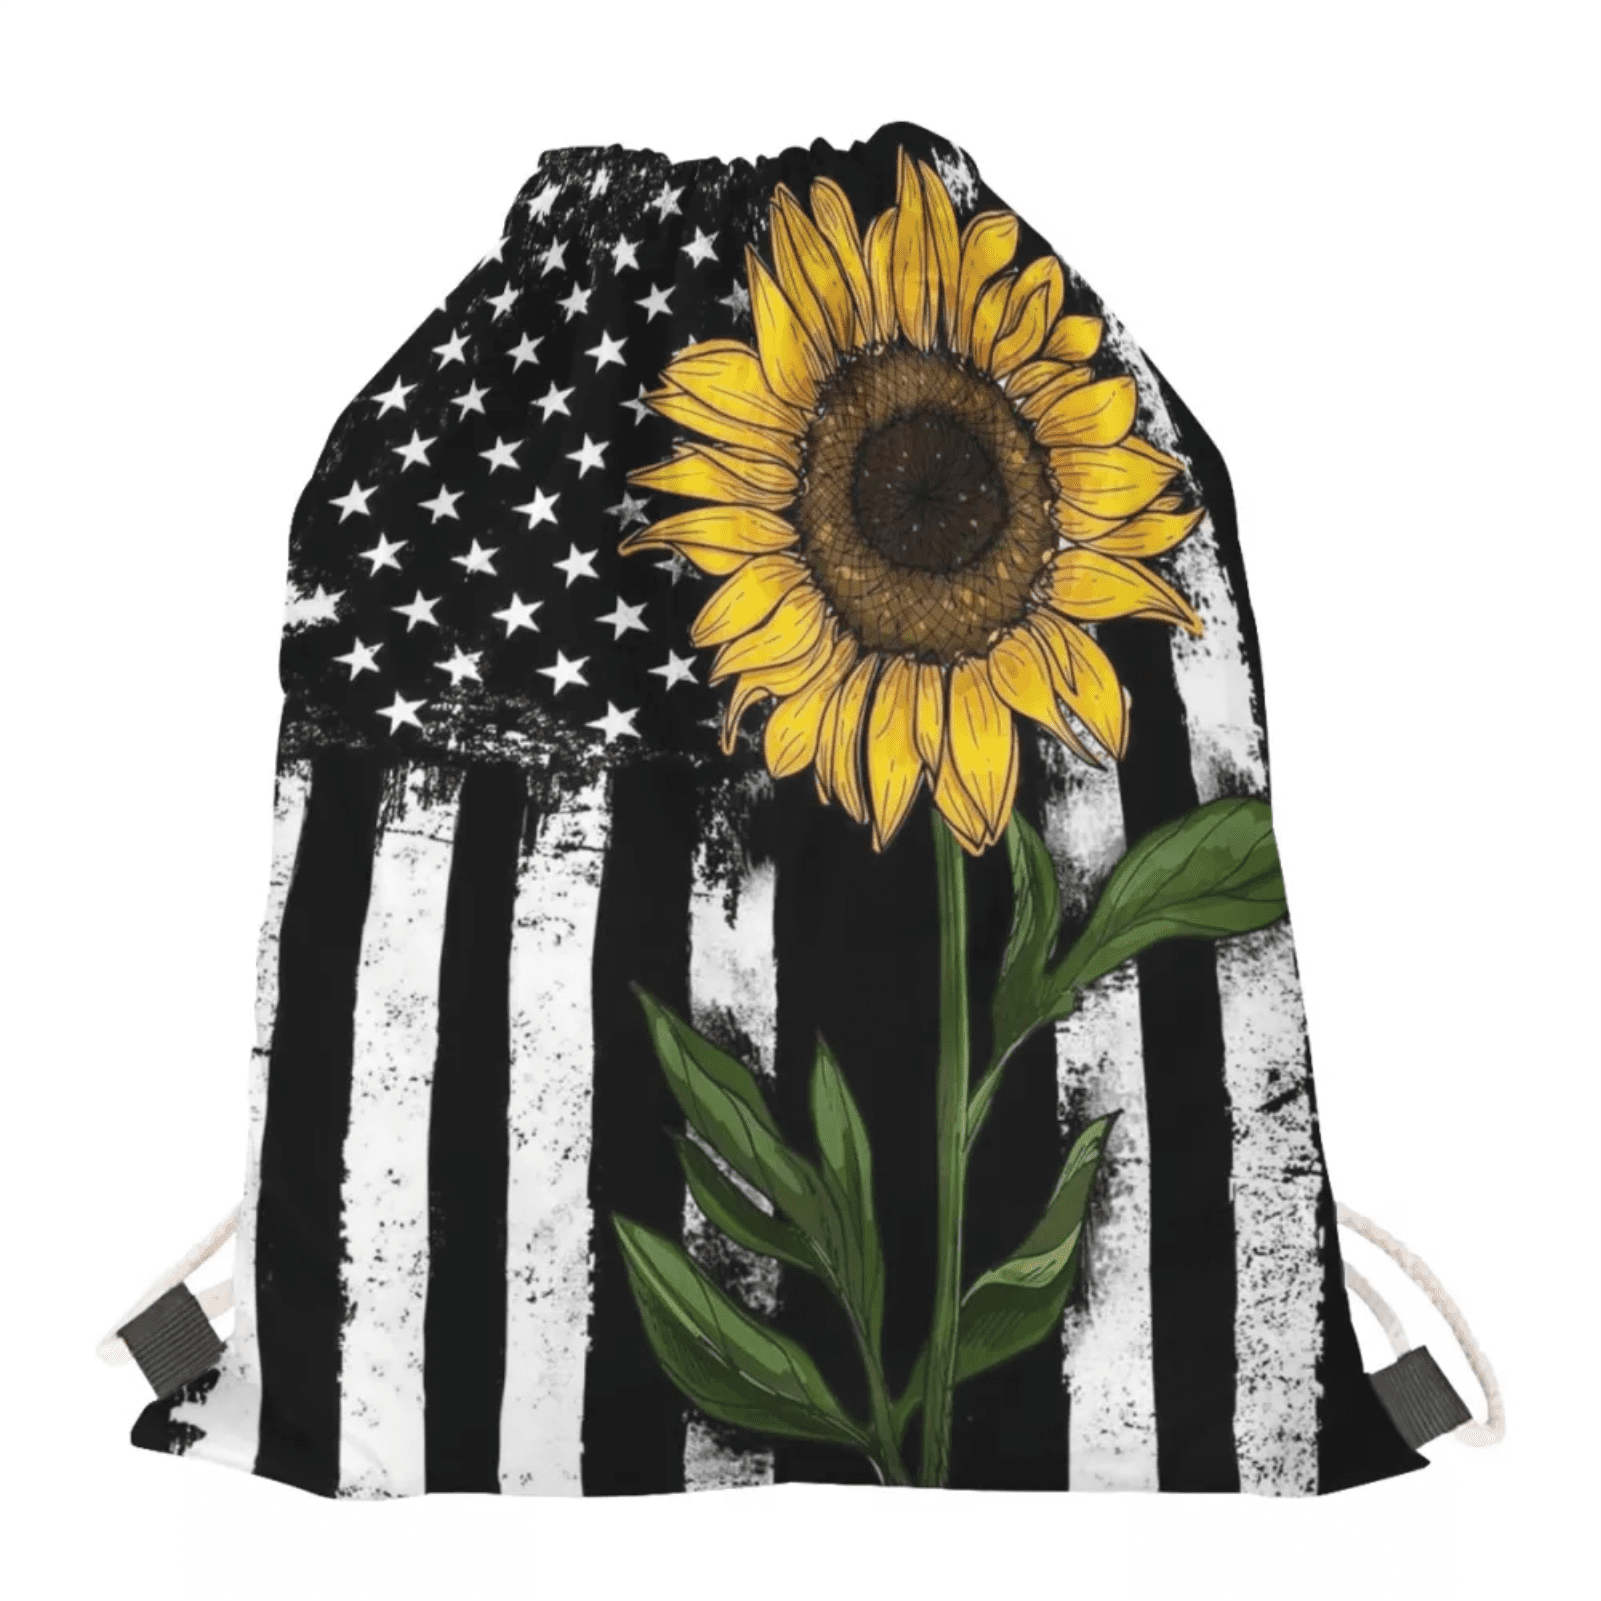 American Flag and Sunflower Drawstring Backpack